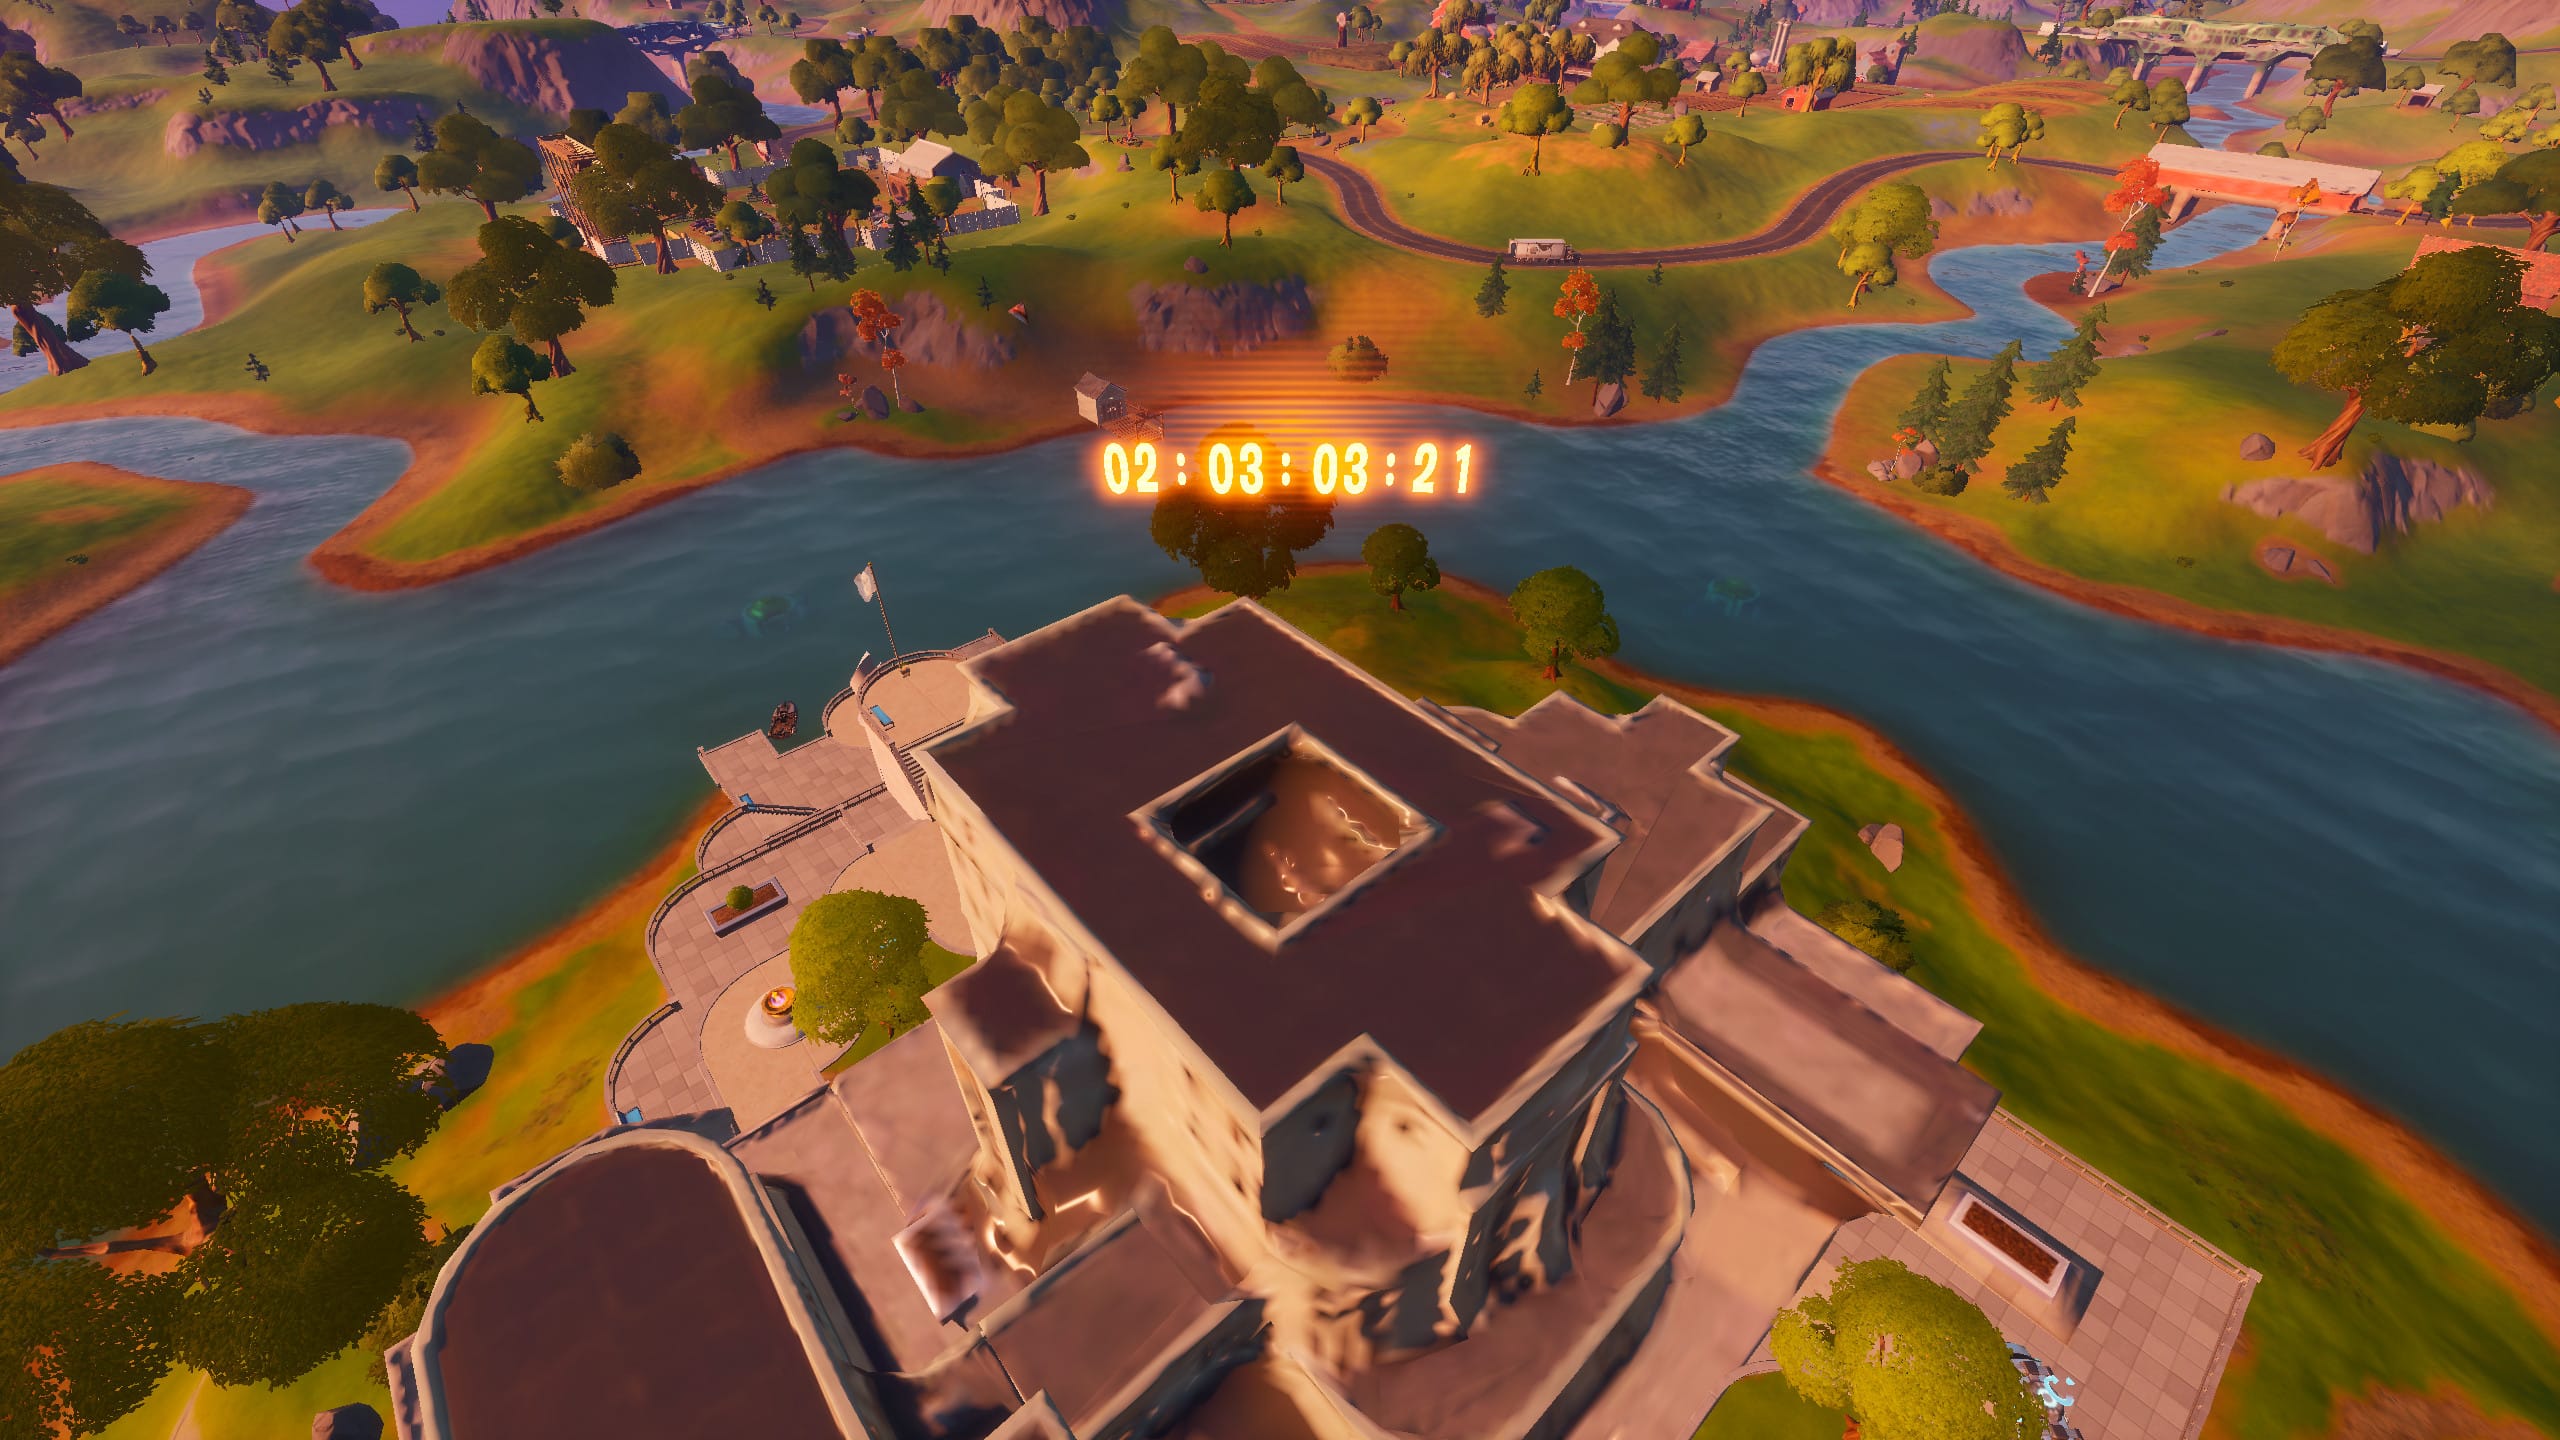 Fortnite: Live Event Countdown Appeared Above The Agency